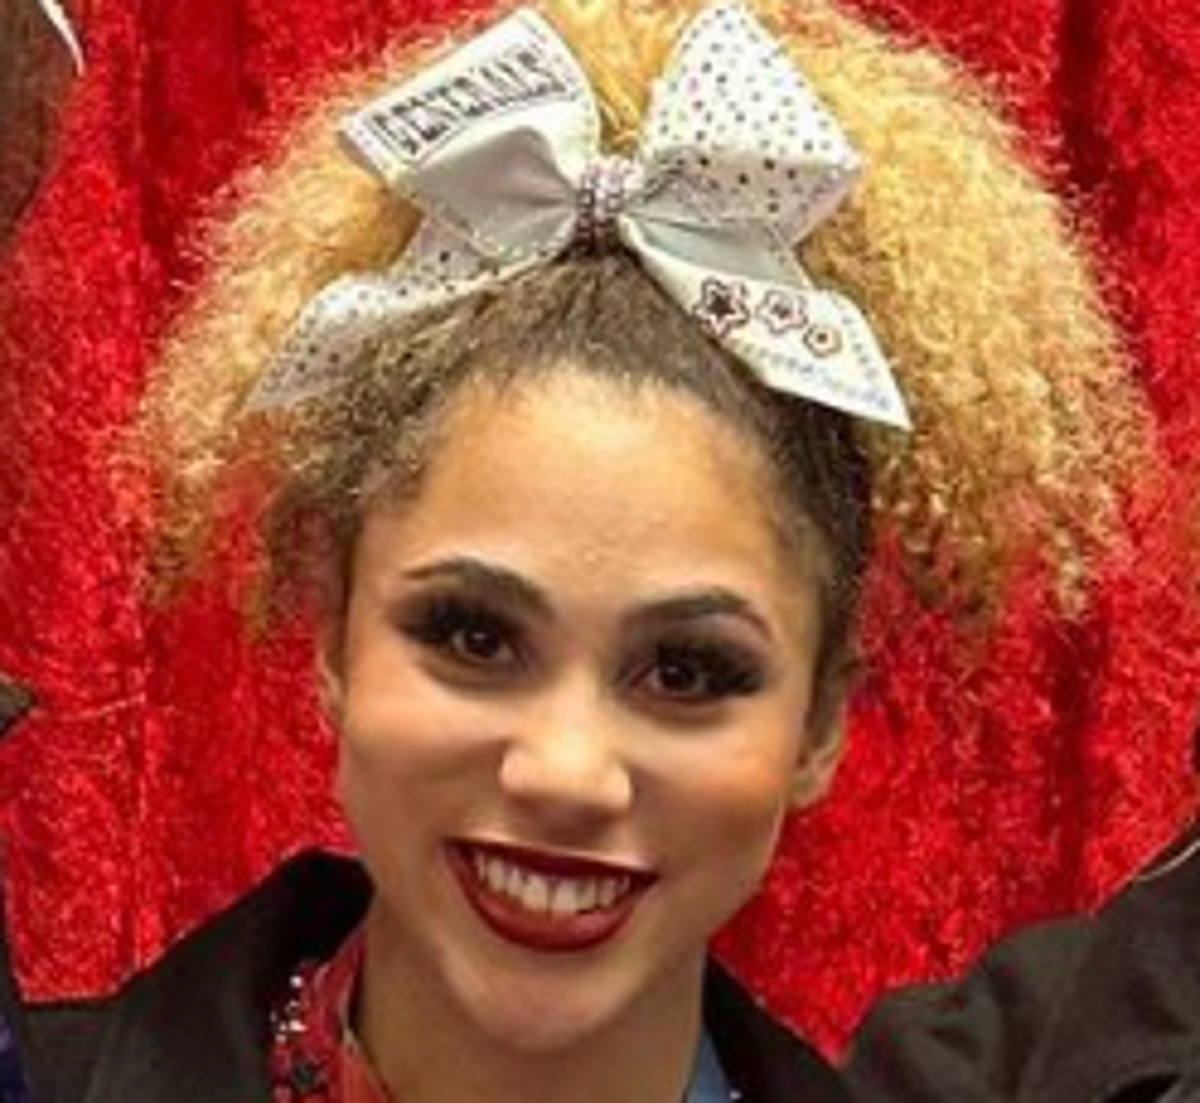 Texas cheerleader recounts moment she was shot after friend got into wrong car